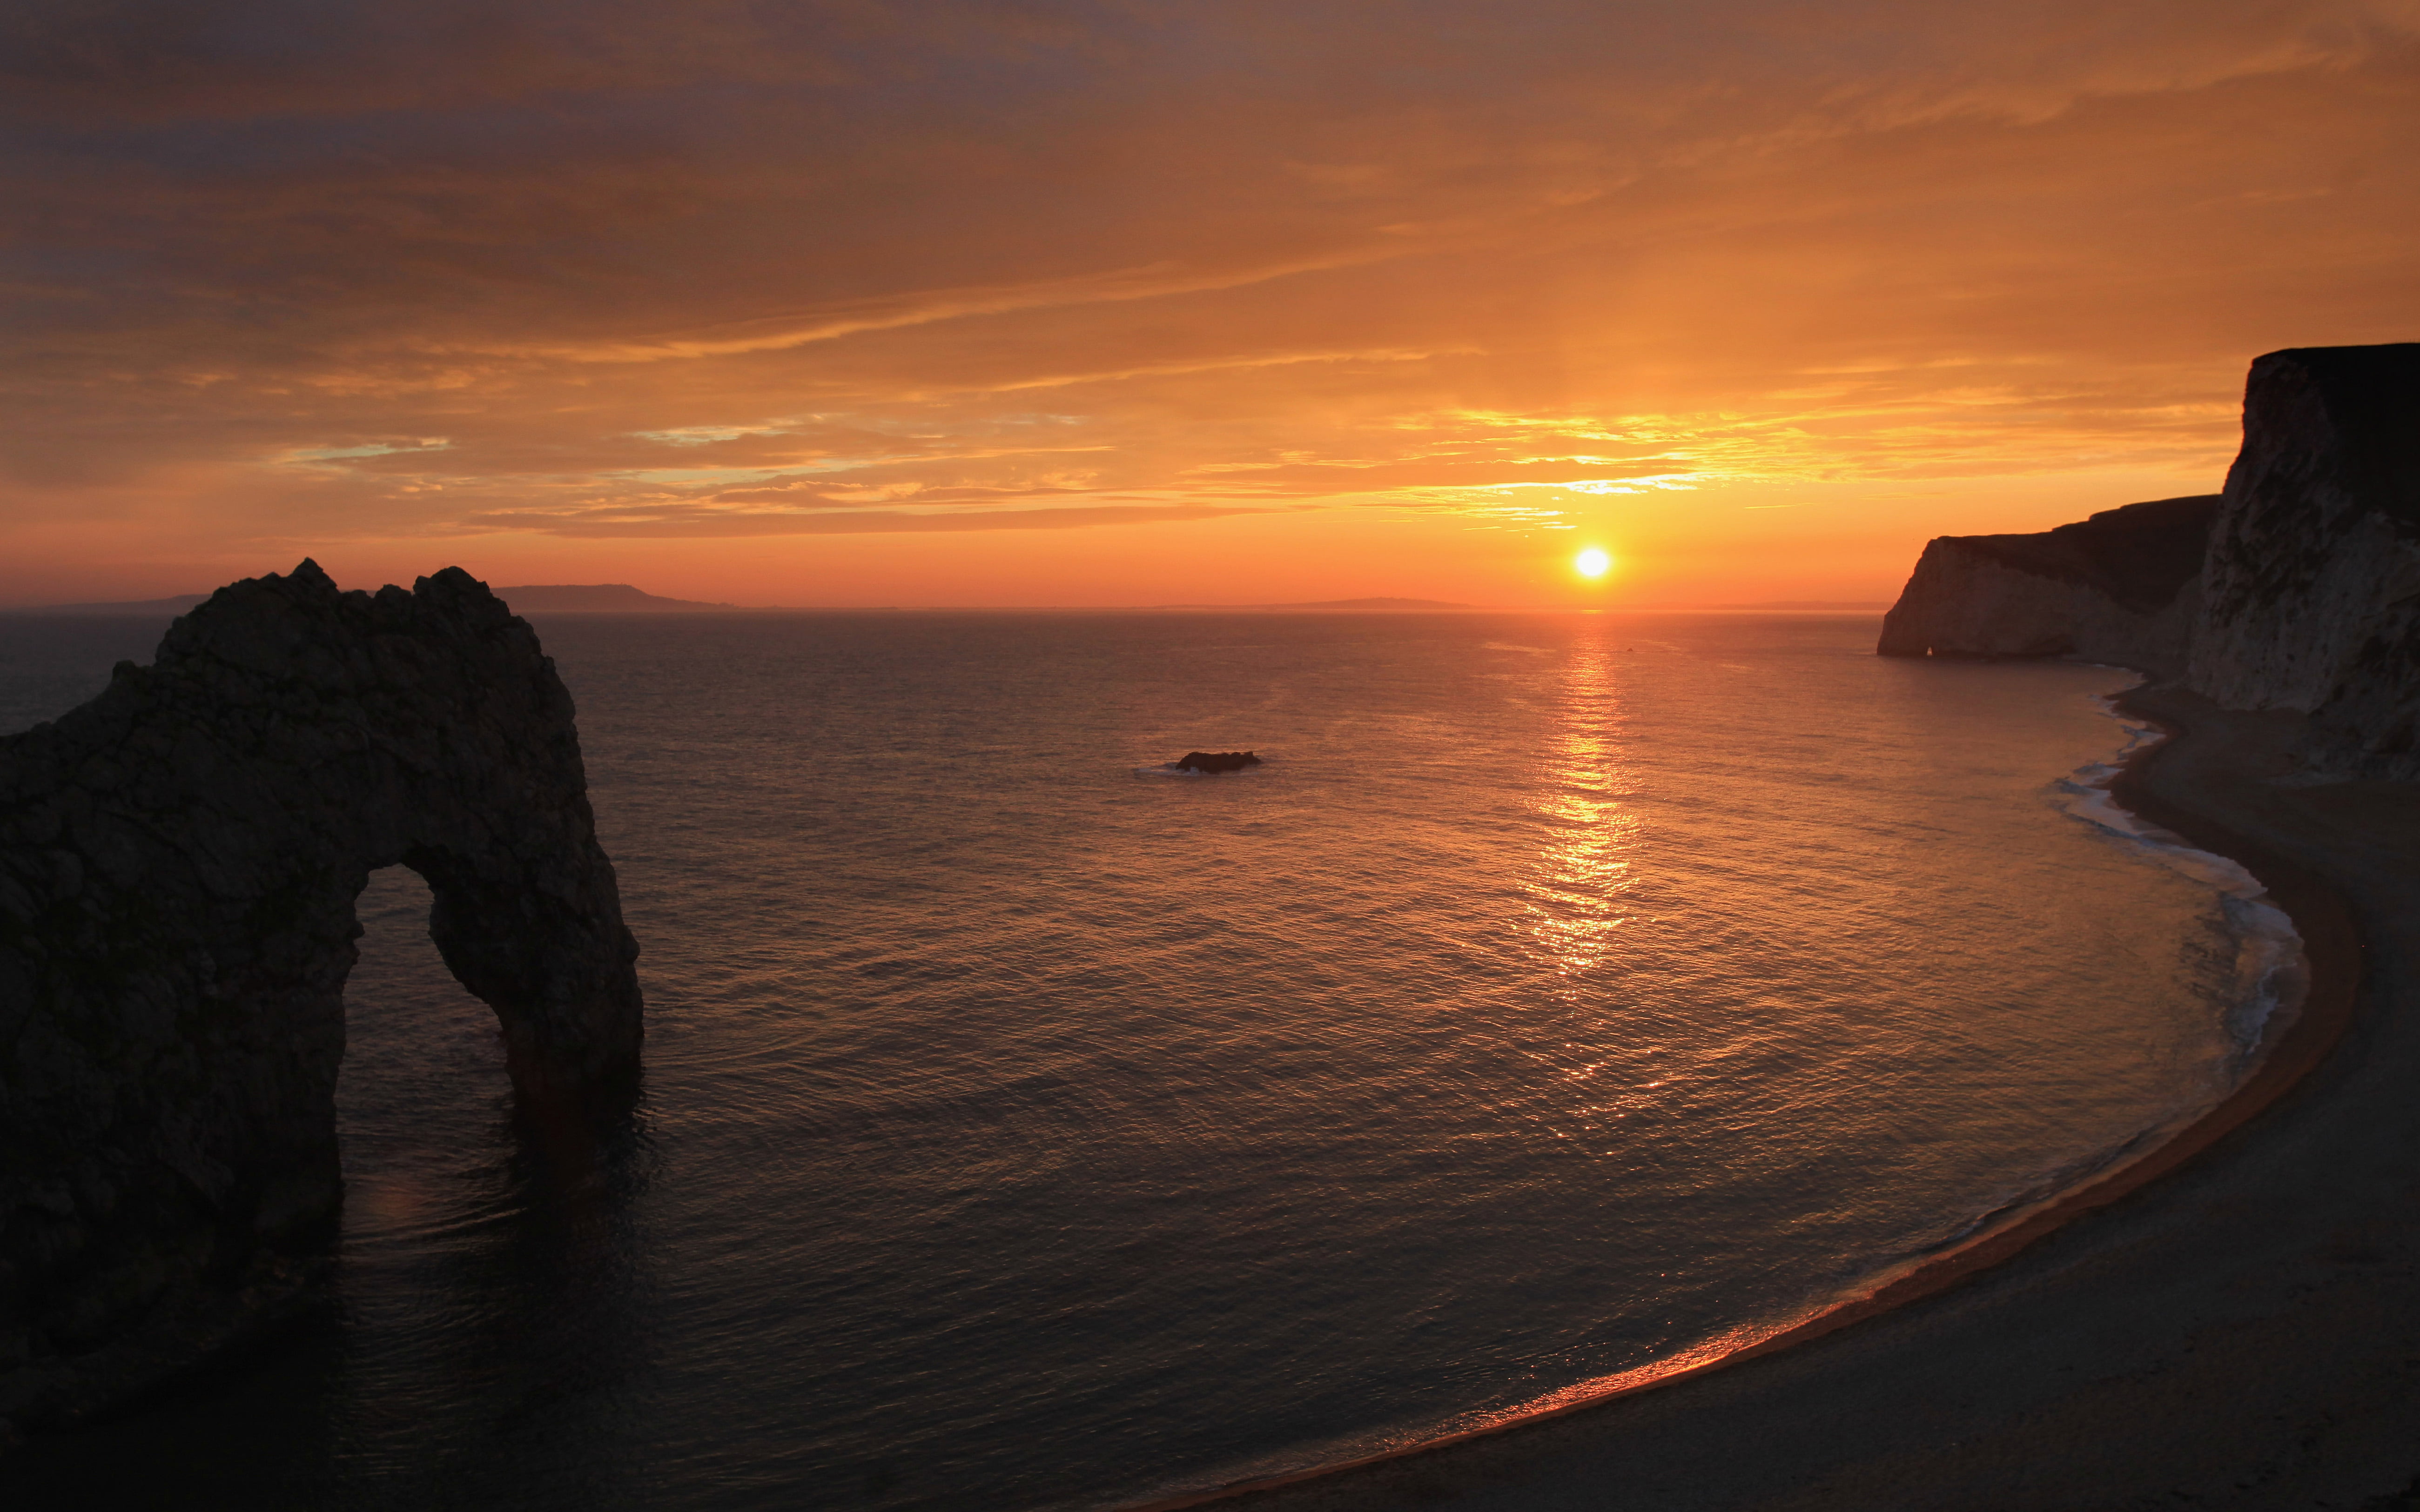 Durdle Door is a natural limestone arch on the Jurassic Coast near Lulworth in Dorset, England-5200×3250